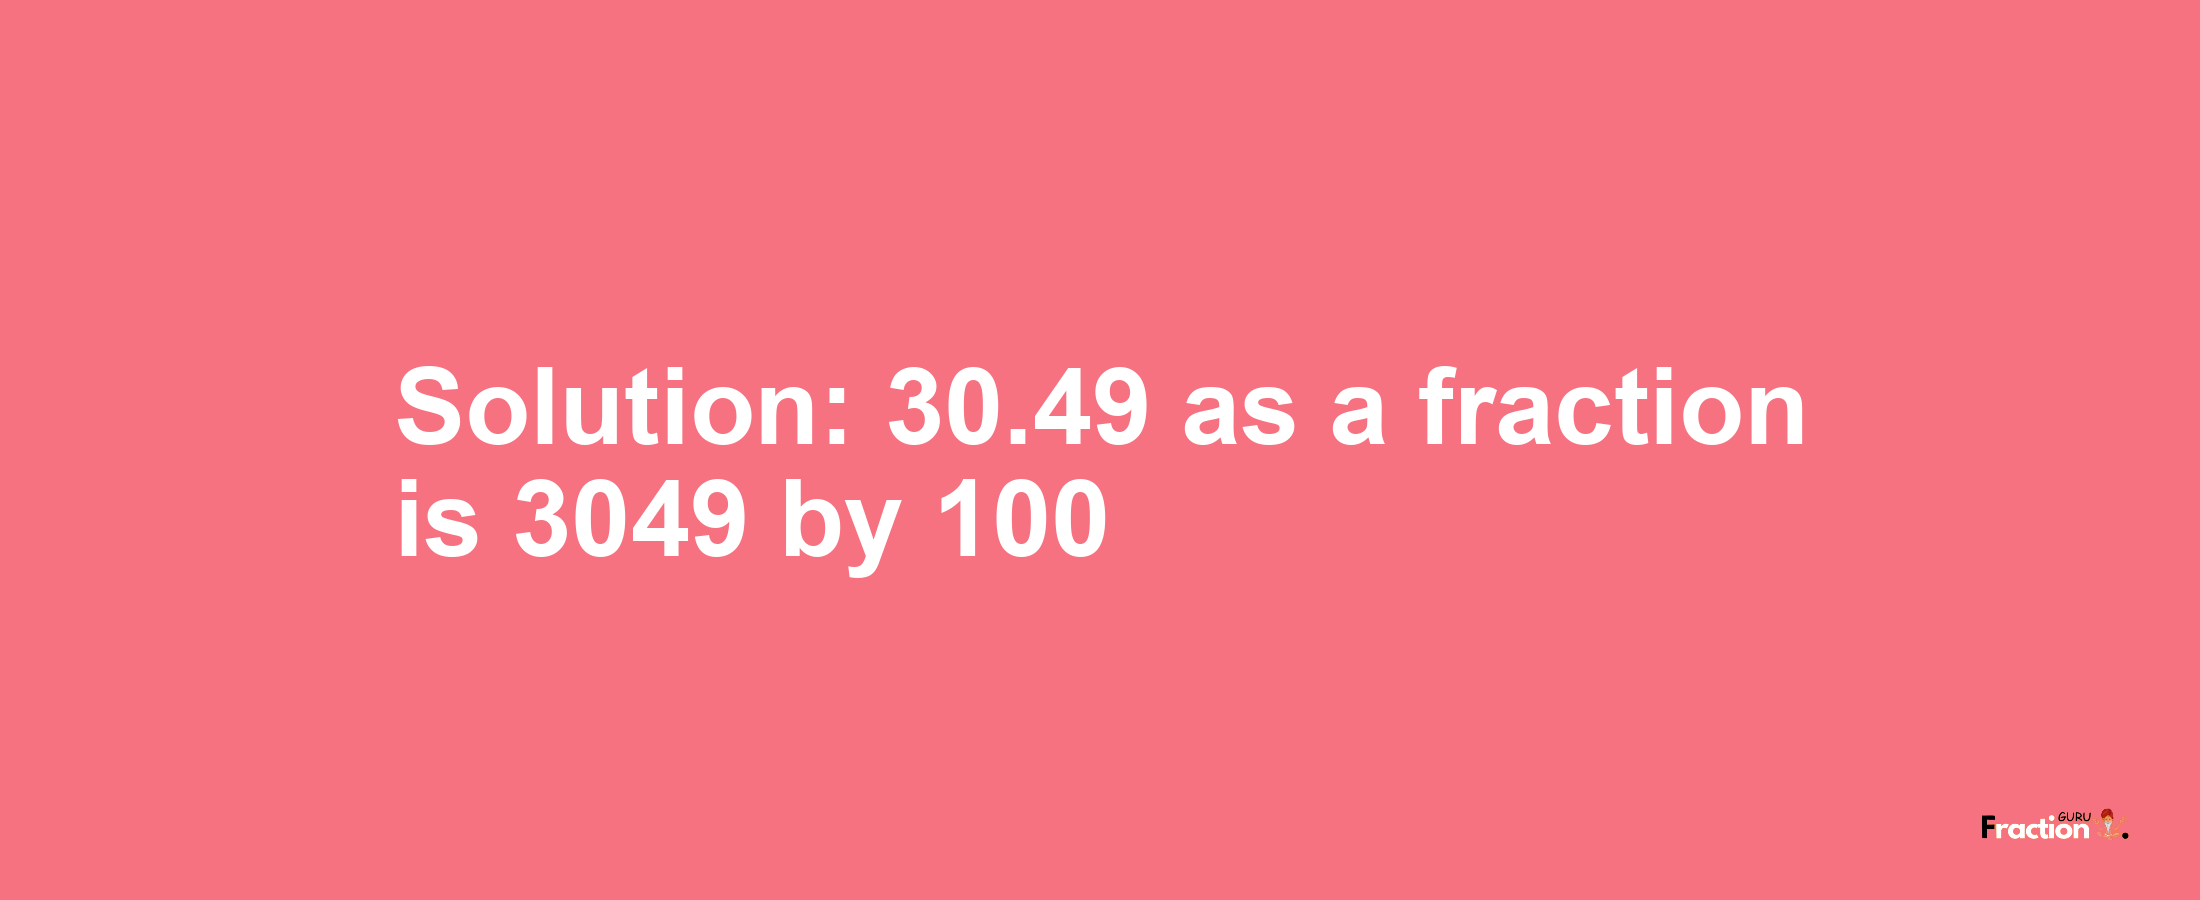 Solution:30.49 as a fraction is 3049/100